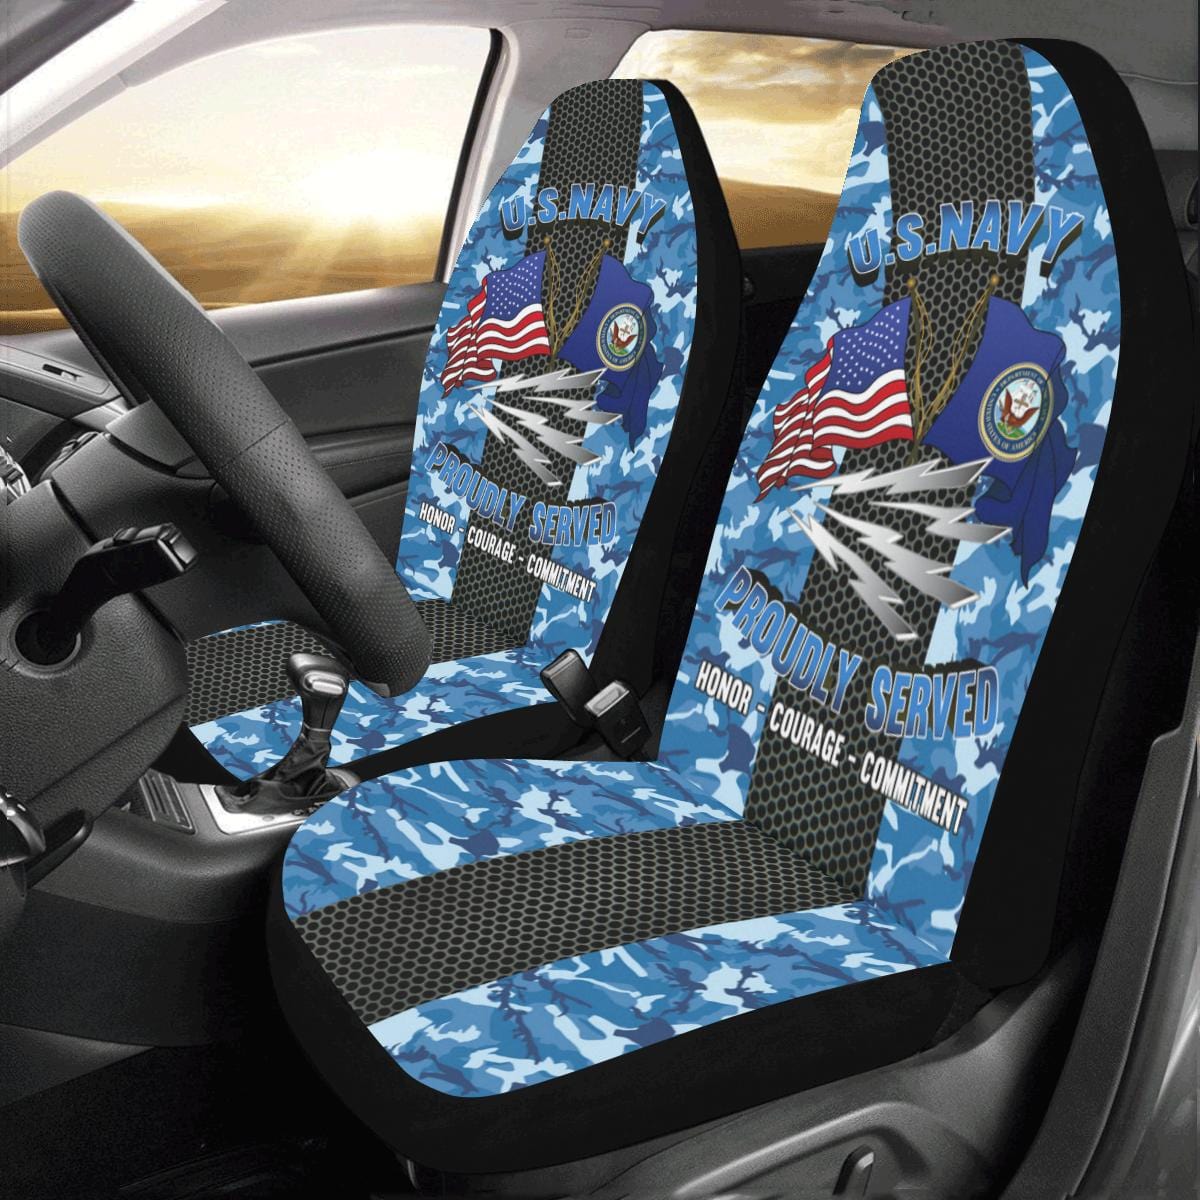 U.S Navy Radioman Navy RM Car Seat Covers (Set of 2)-SeatCovers-Navy-Rate-Veterans Nation